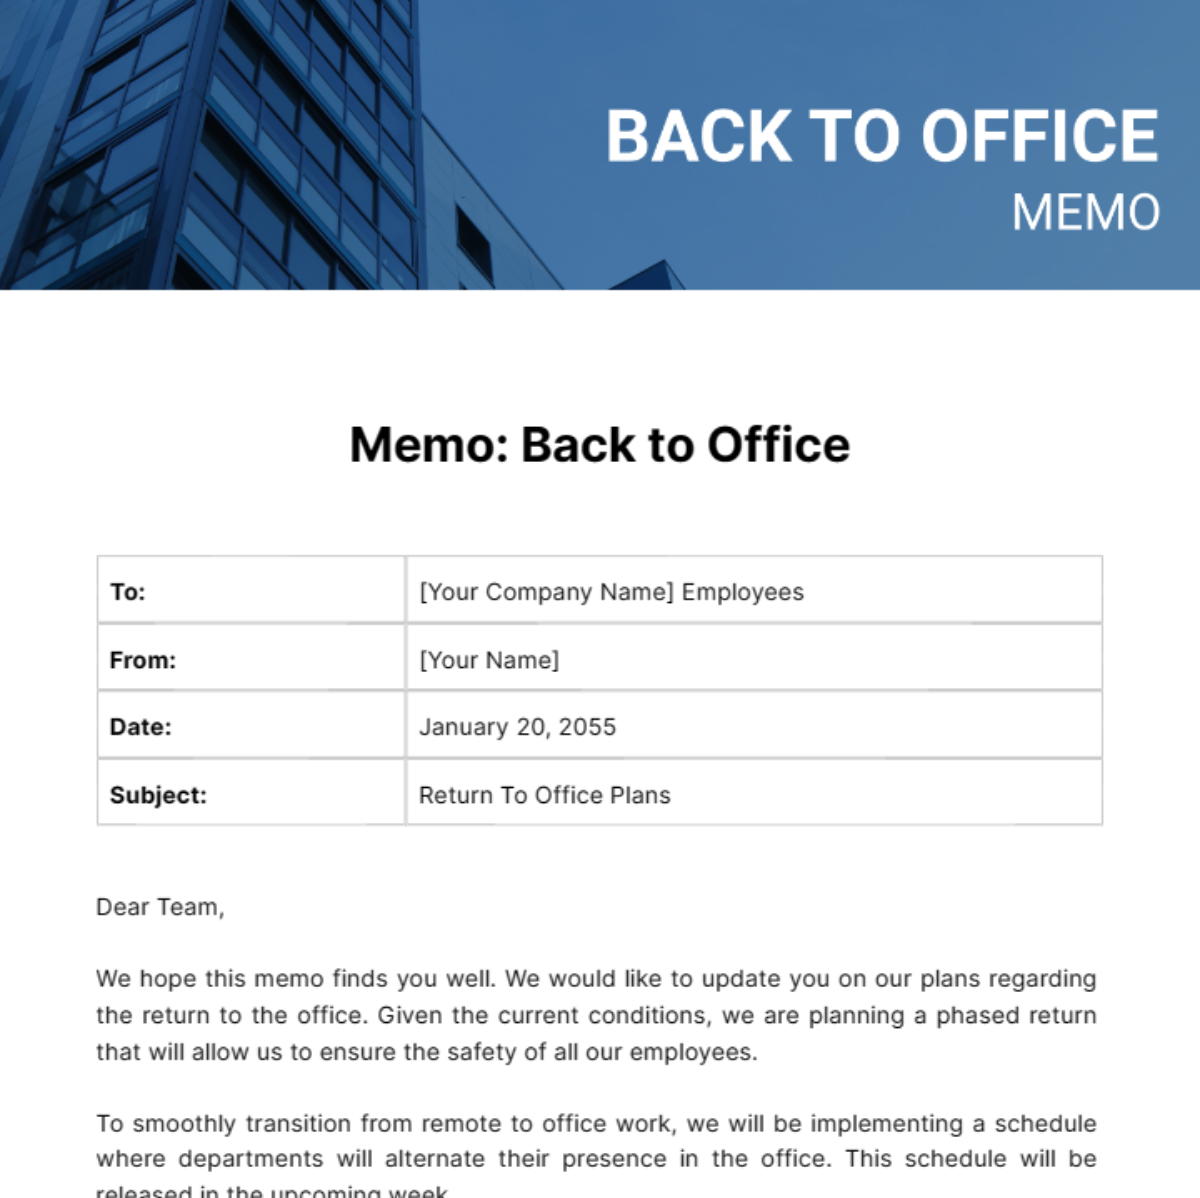 Back to Office Memo